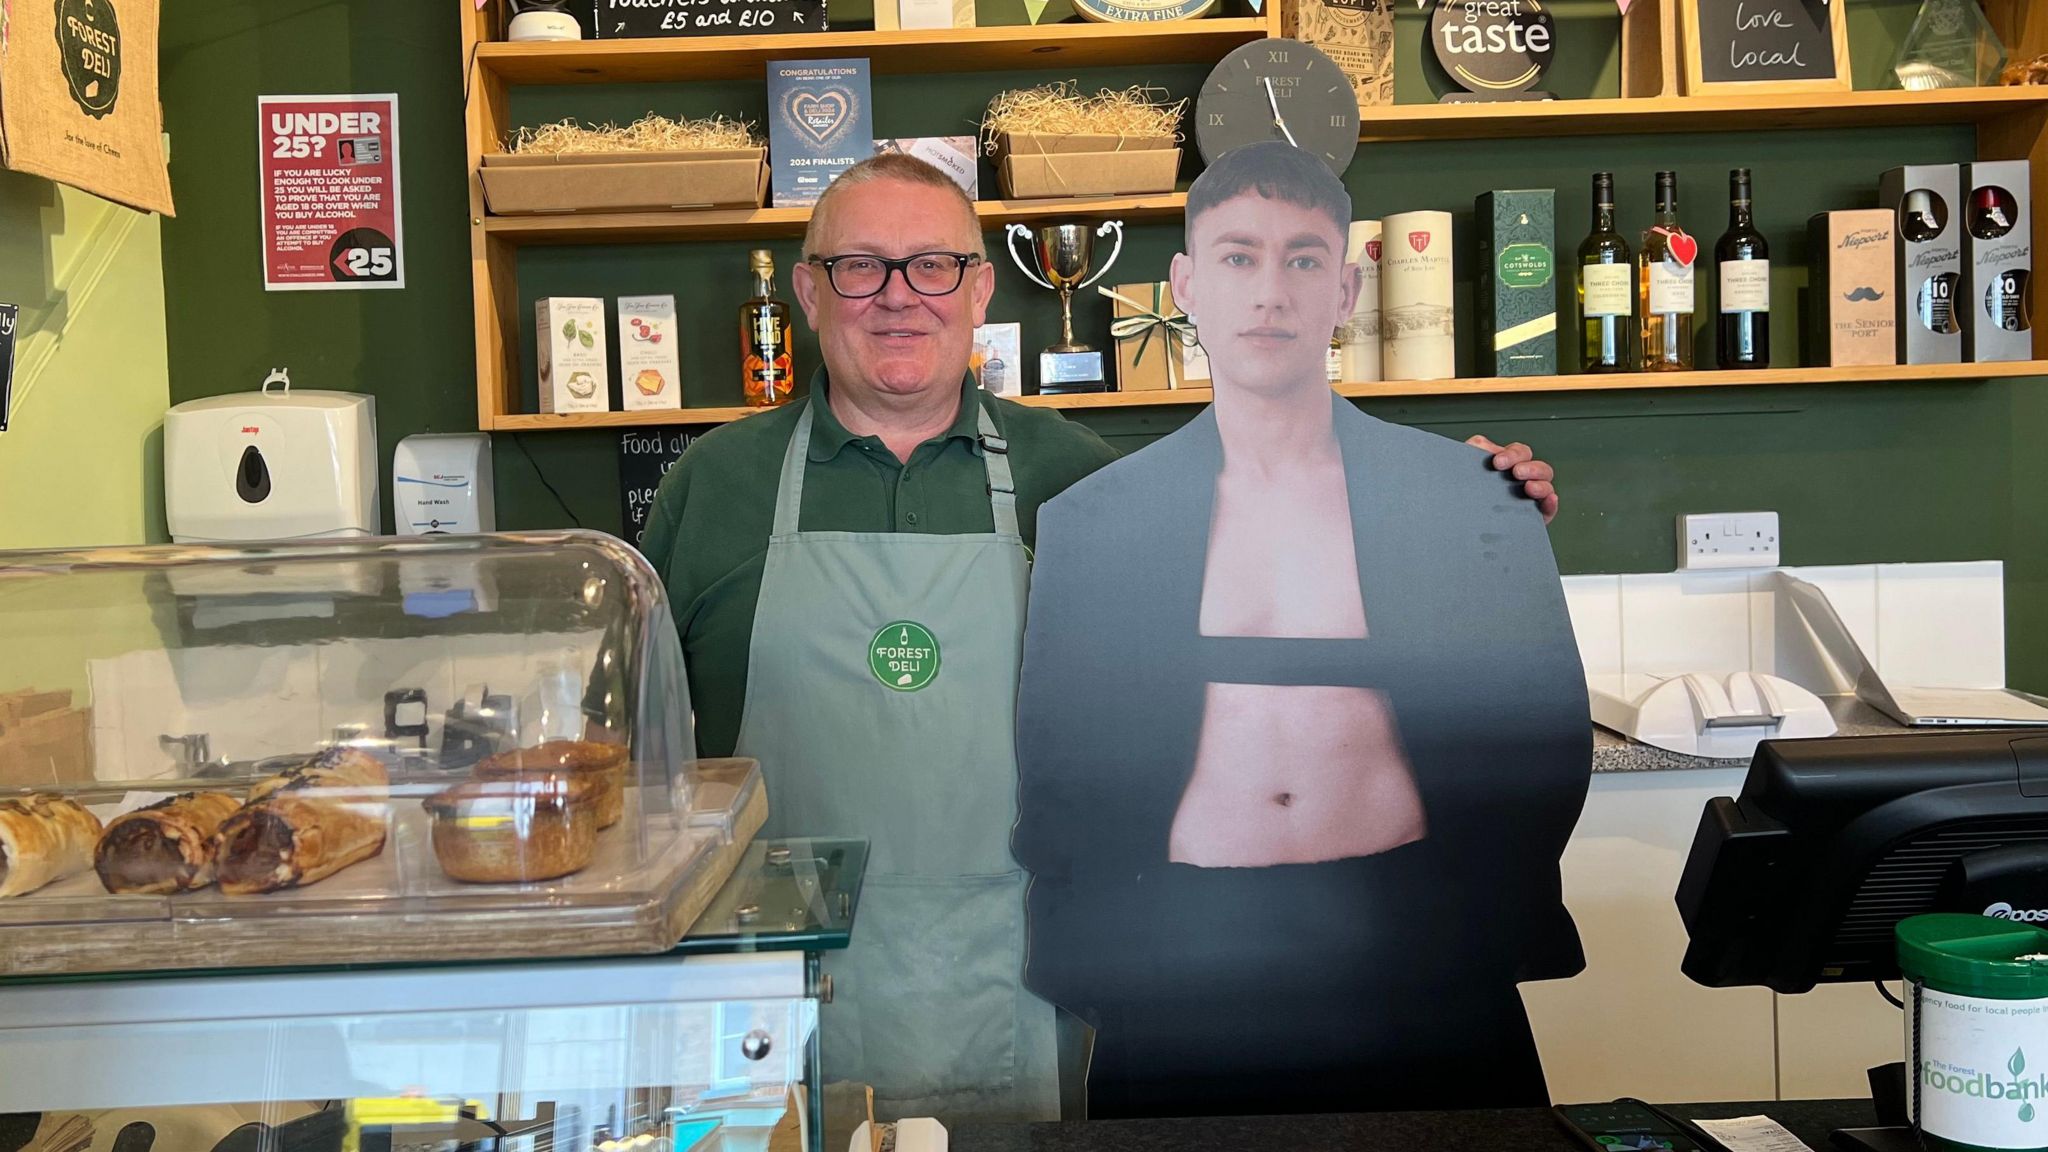 A Forest Deli worker posing with Olly Alexander behind the deli counter